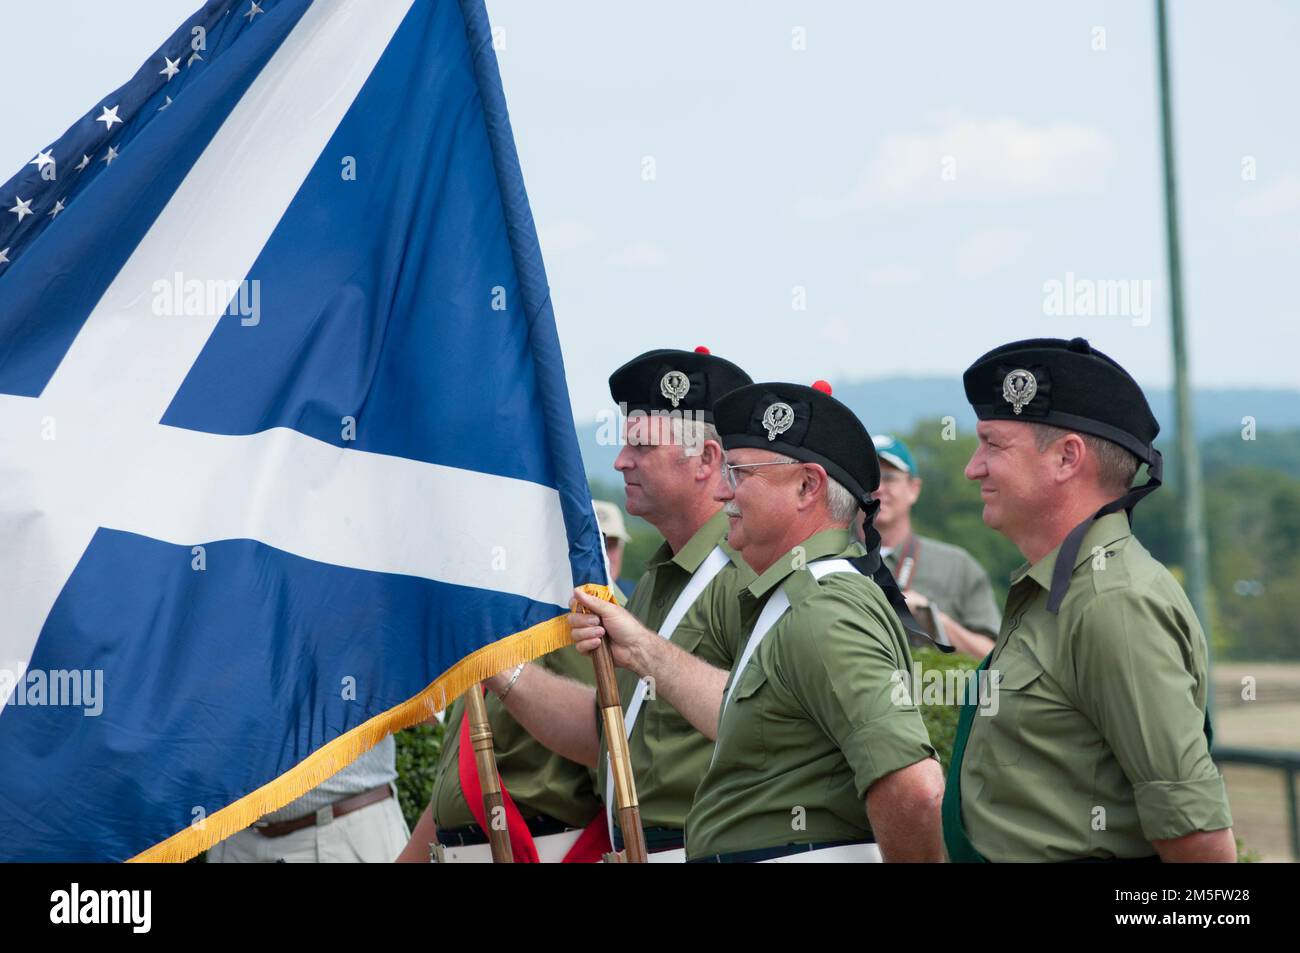 Scottish flag, St. Andrew's Cross, with color guard at a Scottish heritage festival in Virginia, USA. Stock Photo